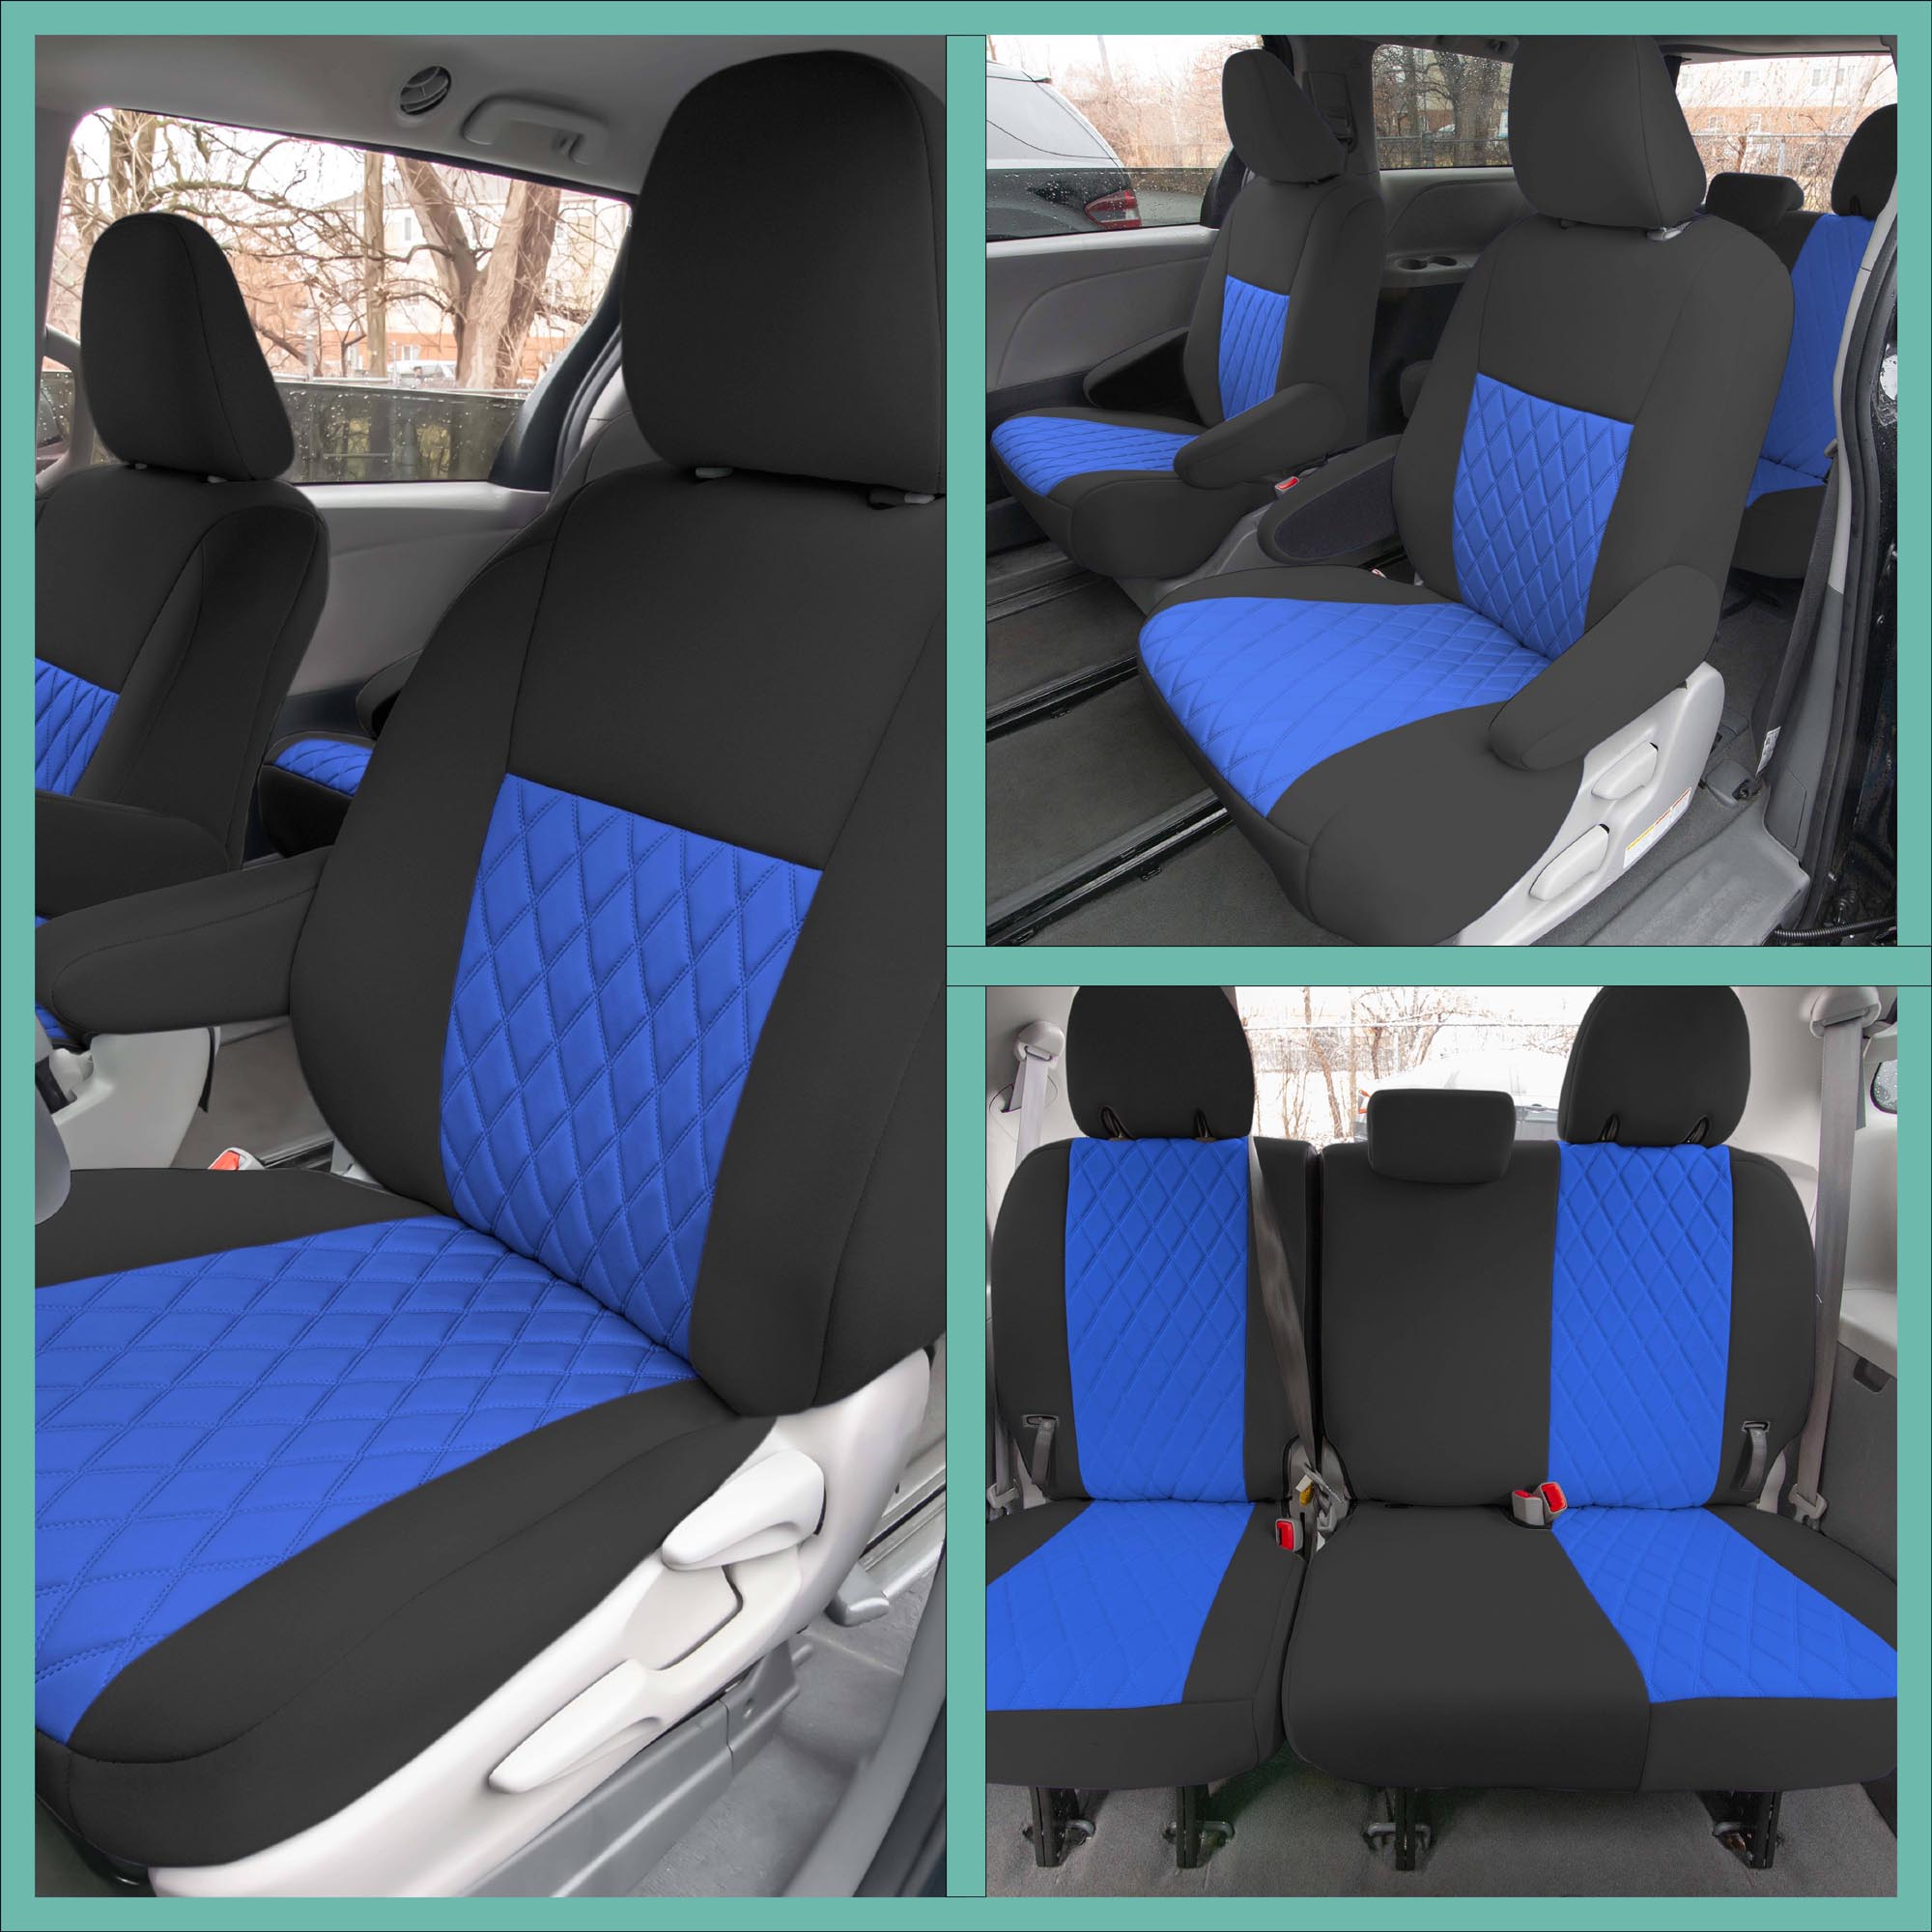 FH Group Custom Fit Car Seat Covers for Toyota Sienna 2011-2020, Car Seat  Cover Full Set, Automotive Seat Covers in COLOR Neoprene, Waterproof and  Washable Seat Covers Blue/Black